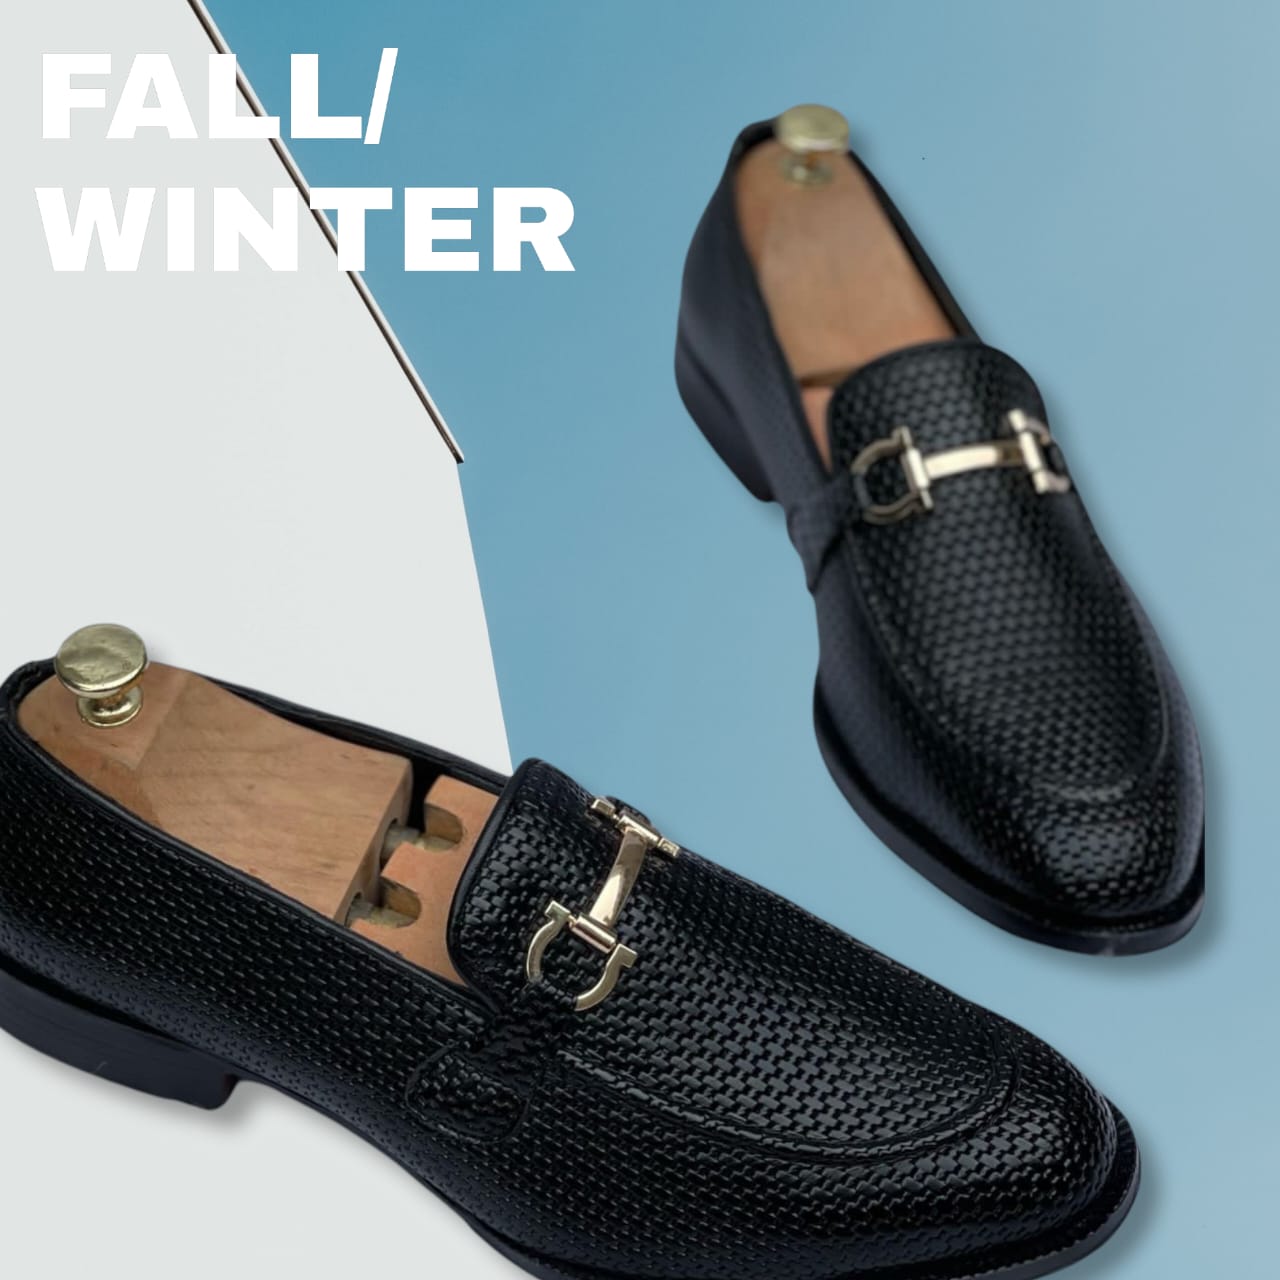 New Woven Moccasin Loafer For Office Wear And Casual Wear- JackMarc